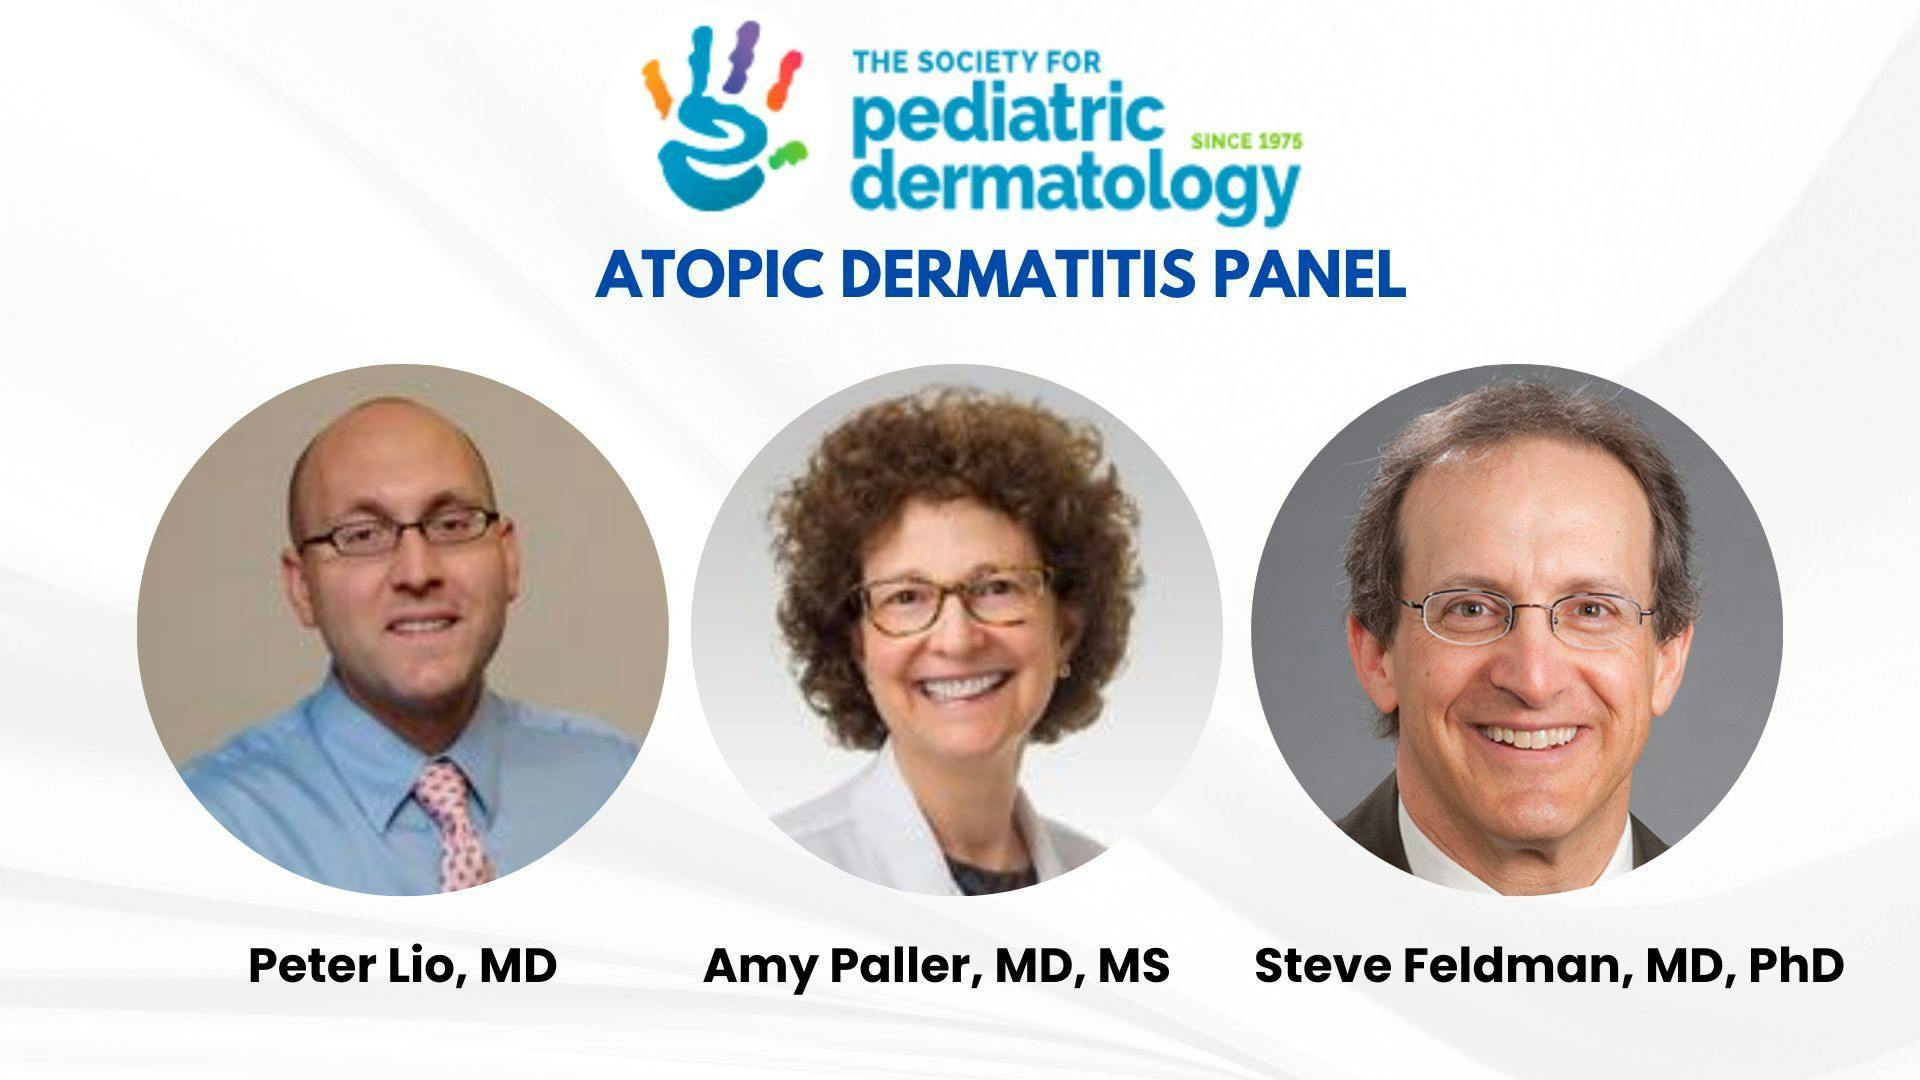 Alternatives, Advancements, and Adherence in Pediatric Atopic Dermatitis Management